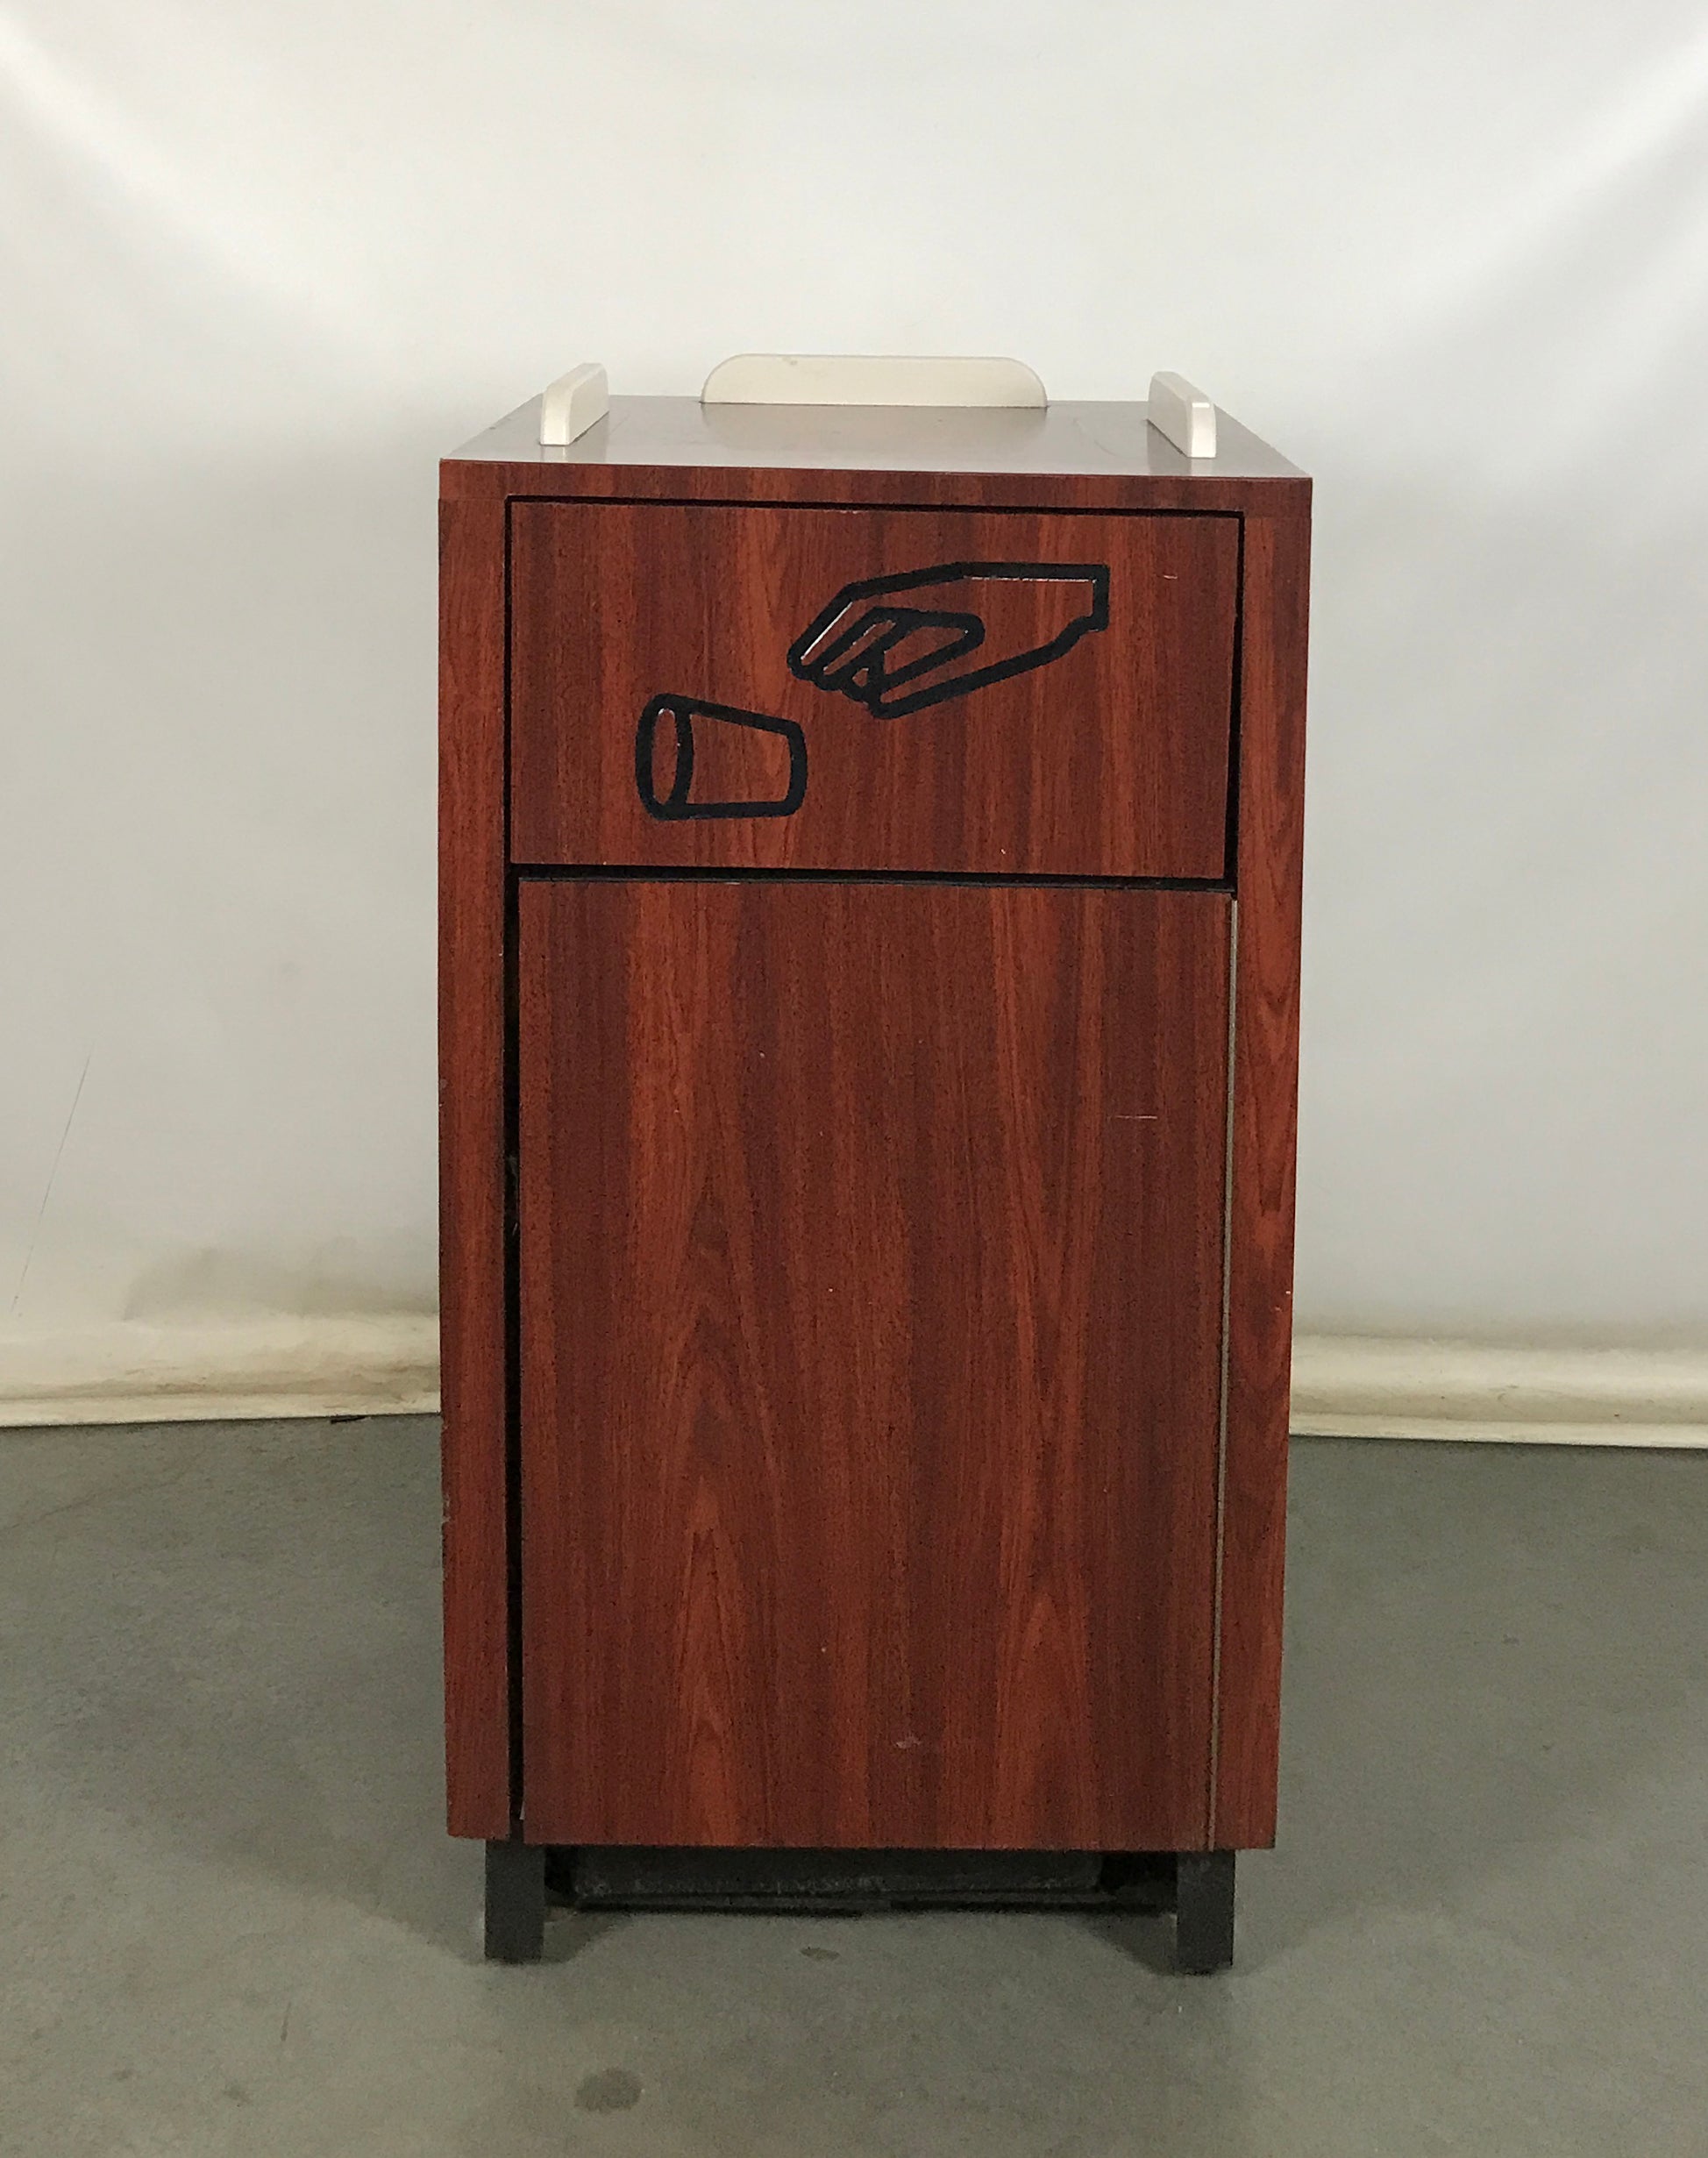 Wooden Tray Top Receptacle Bin Trash Can